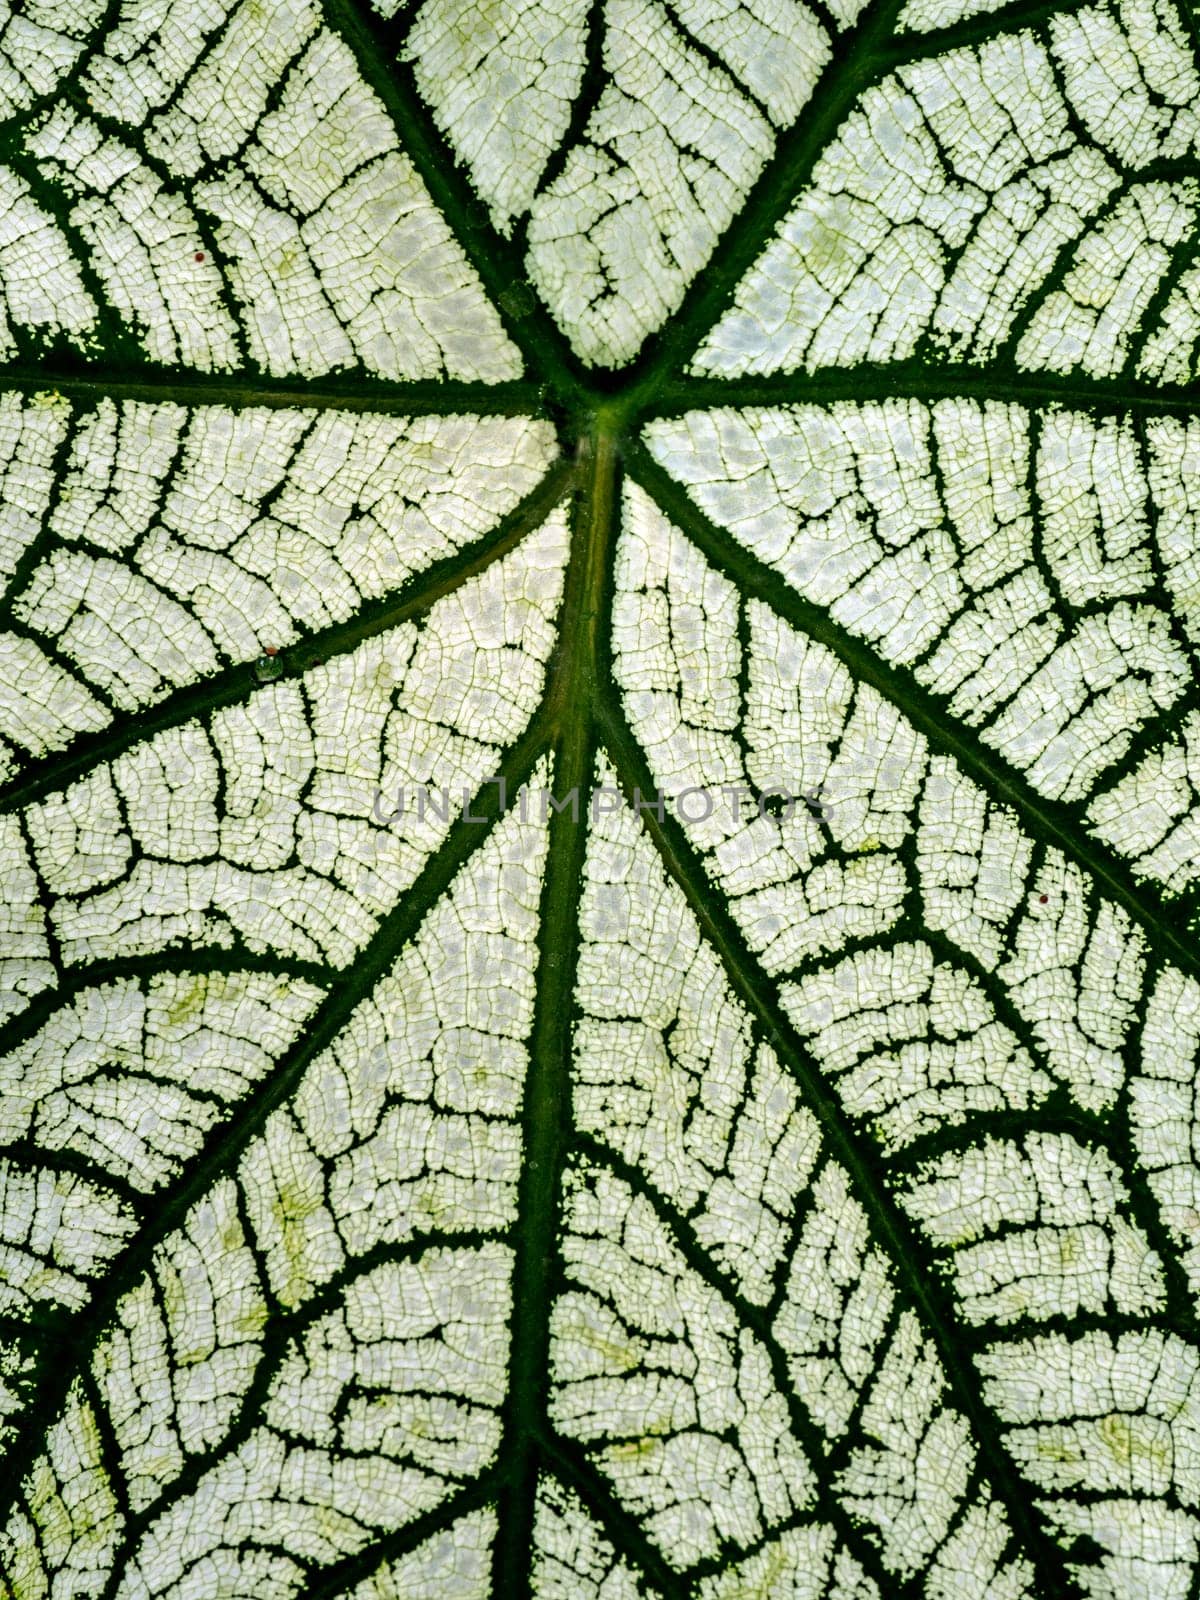 The green pattern on the white surface on the leaf of Caladium bicolor by Satakorn